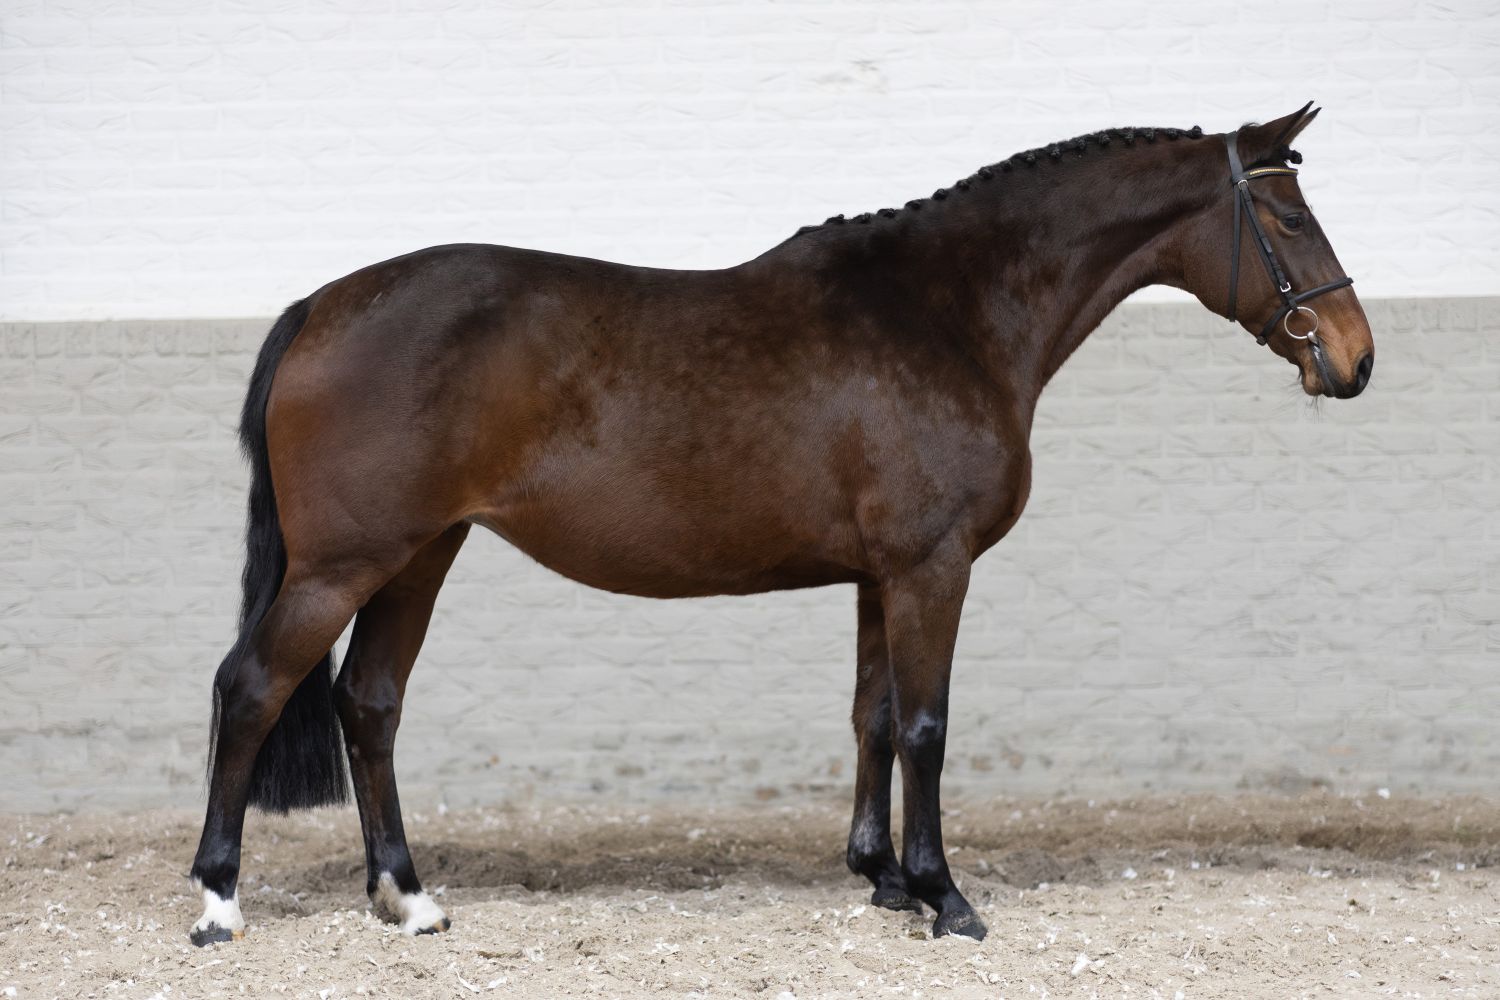 Acquire top quality: Pregnant broodmares and exclusive embryos at Paardenveilingonline.com